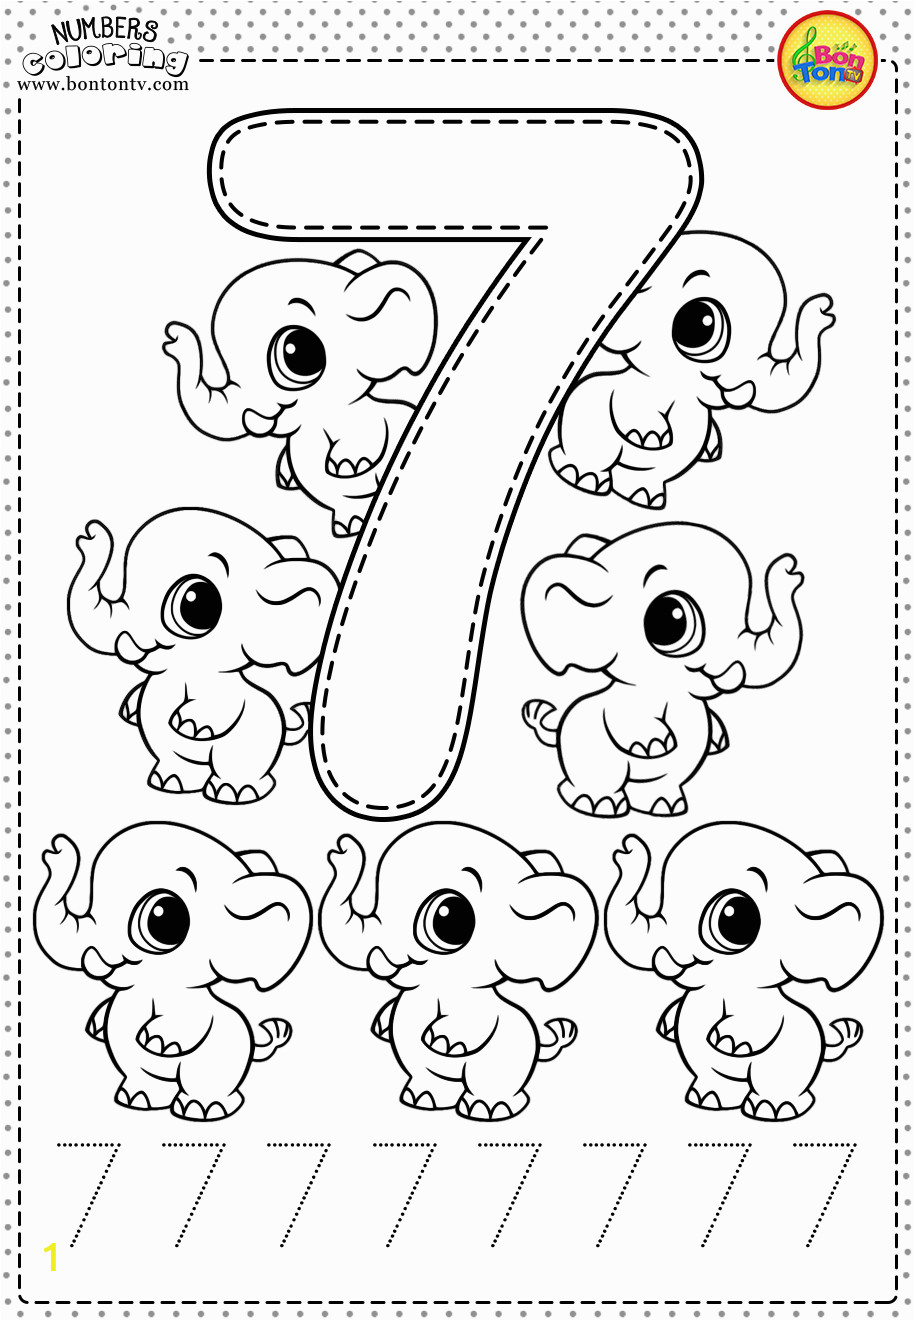 Coloring Pages Printables with Numbers Numbers 1 10 for Kids Math Printable Coloring Pages